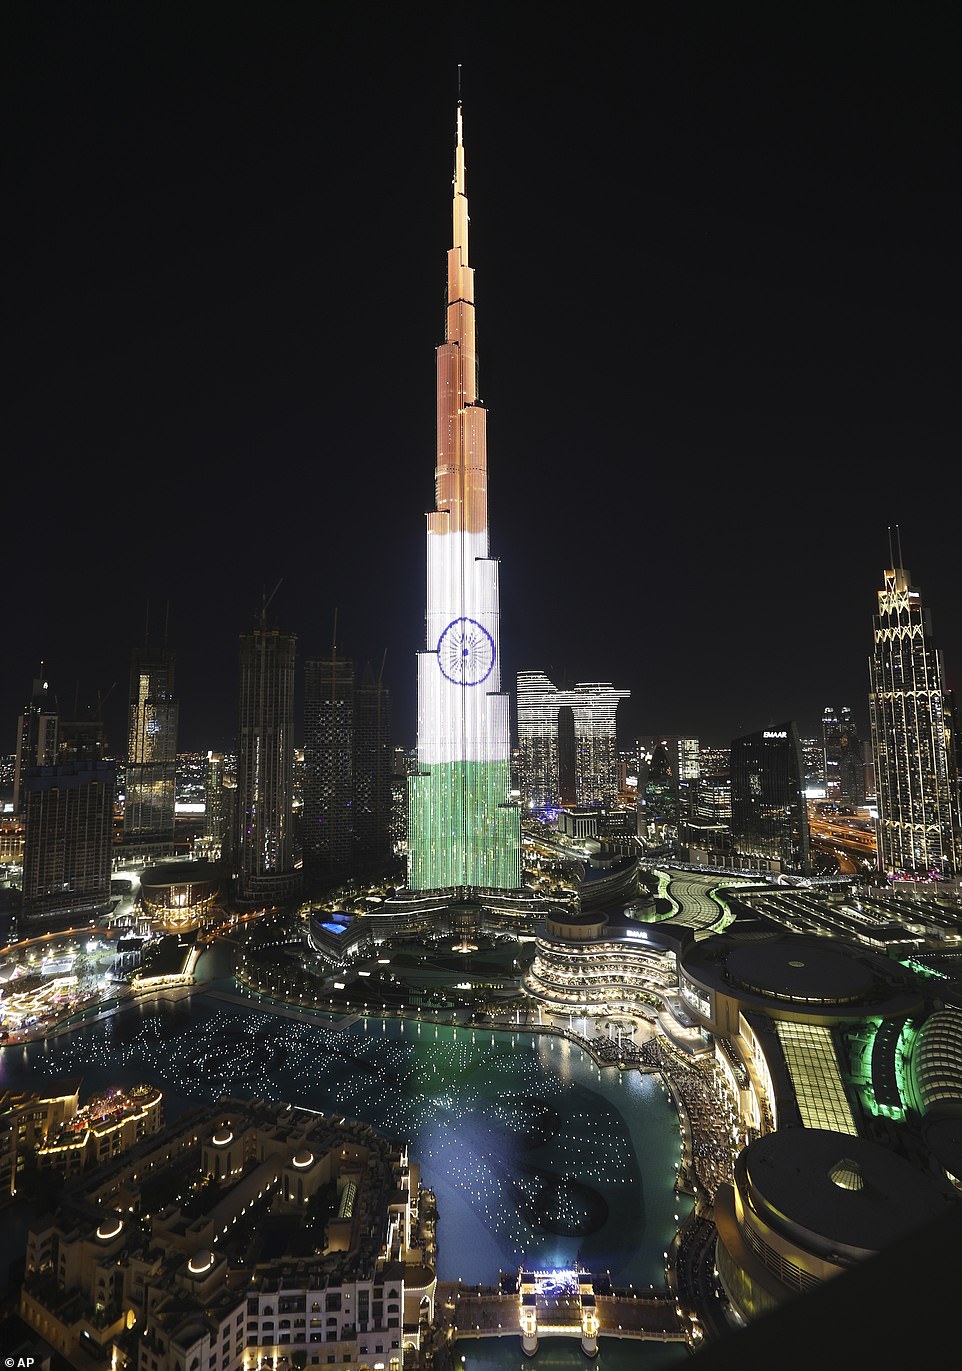 DUBAI: Dubai celebrates the New Year in India by reflecting its national flag on the Burj Khalifa, the world's tallest building. India and the United Arab Emirates share close ties in many sectors